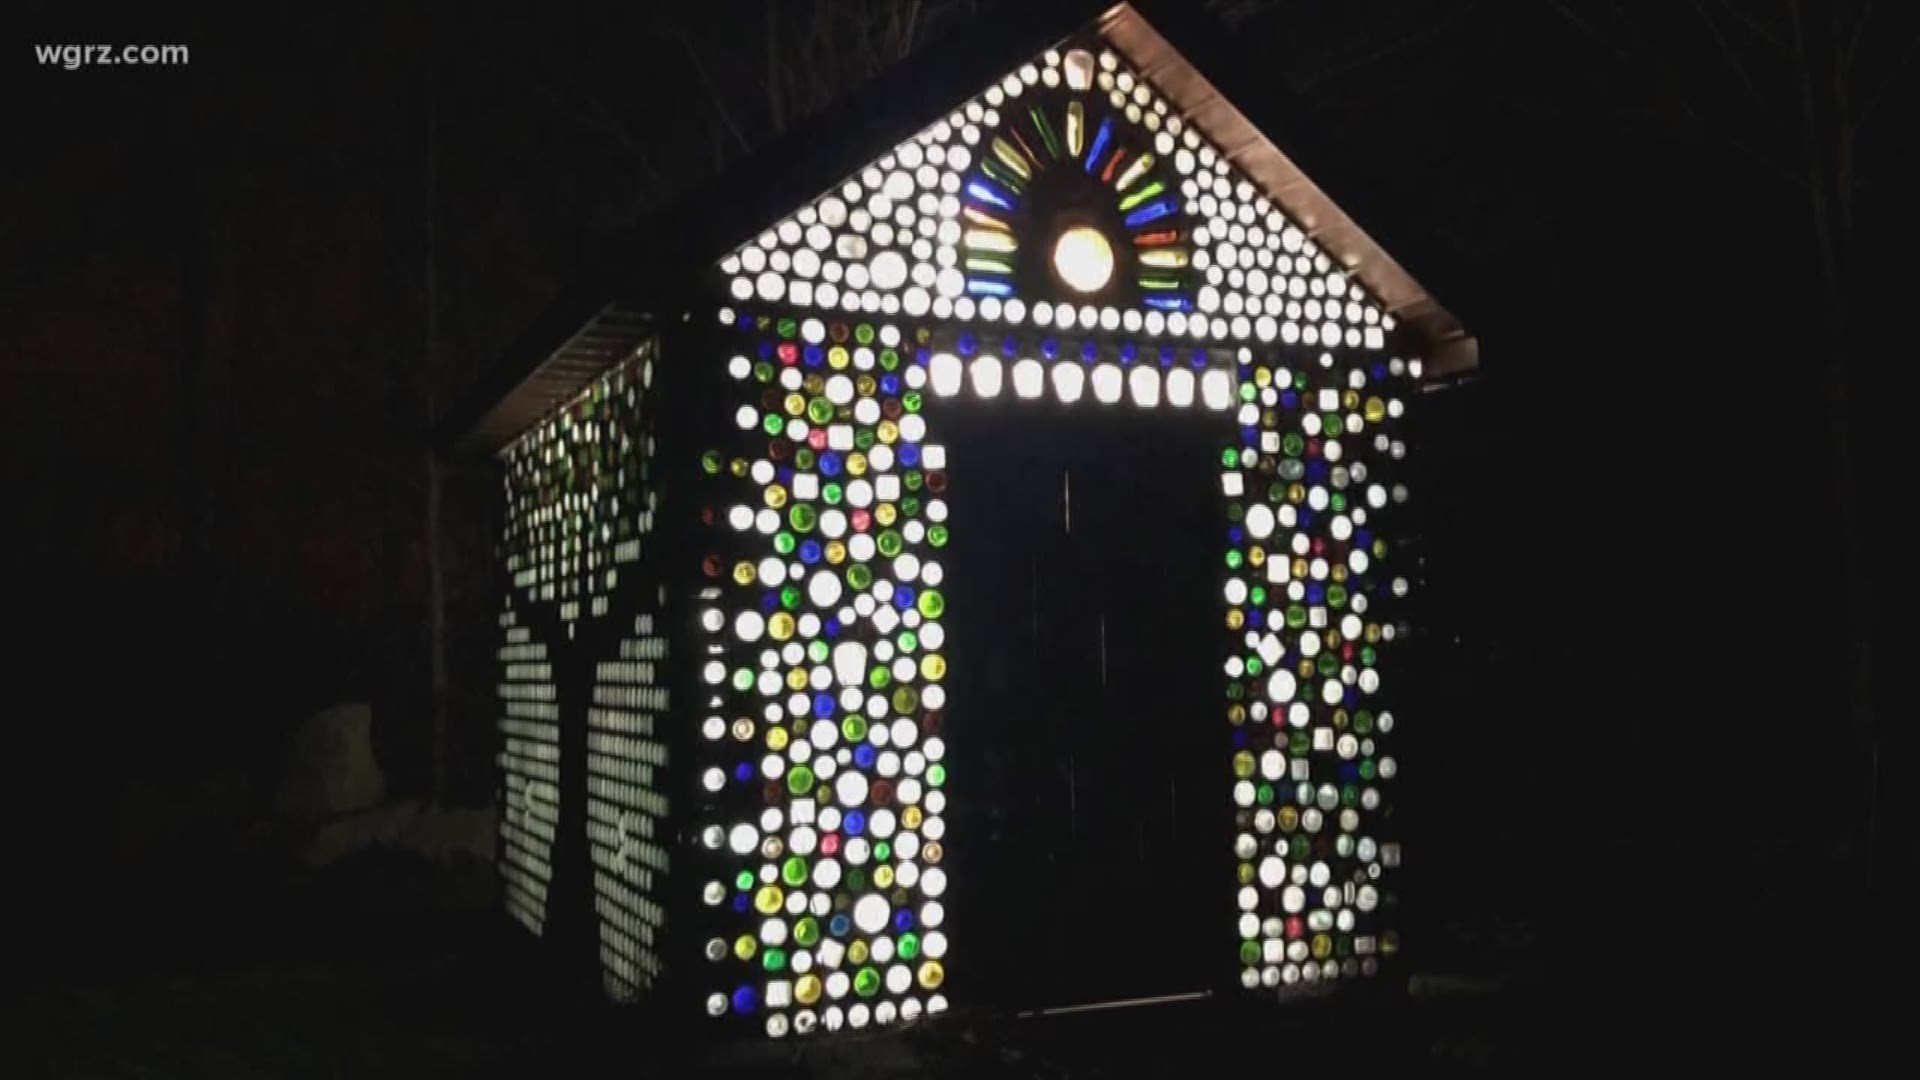 A Niagara County couple took recycling to another level with their colorful backyard creation made from empty wine and liquor bottles.